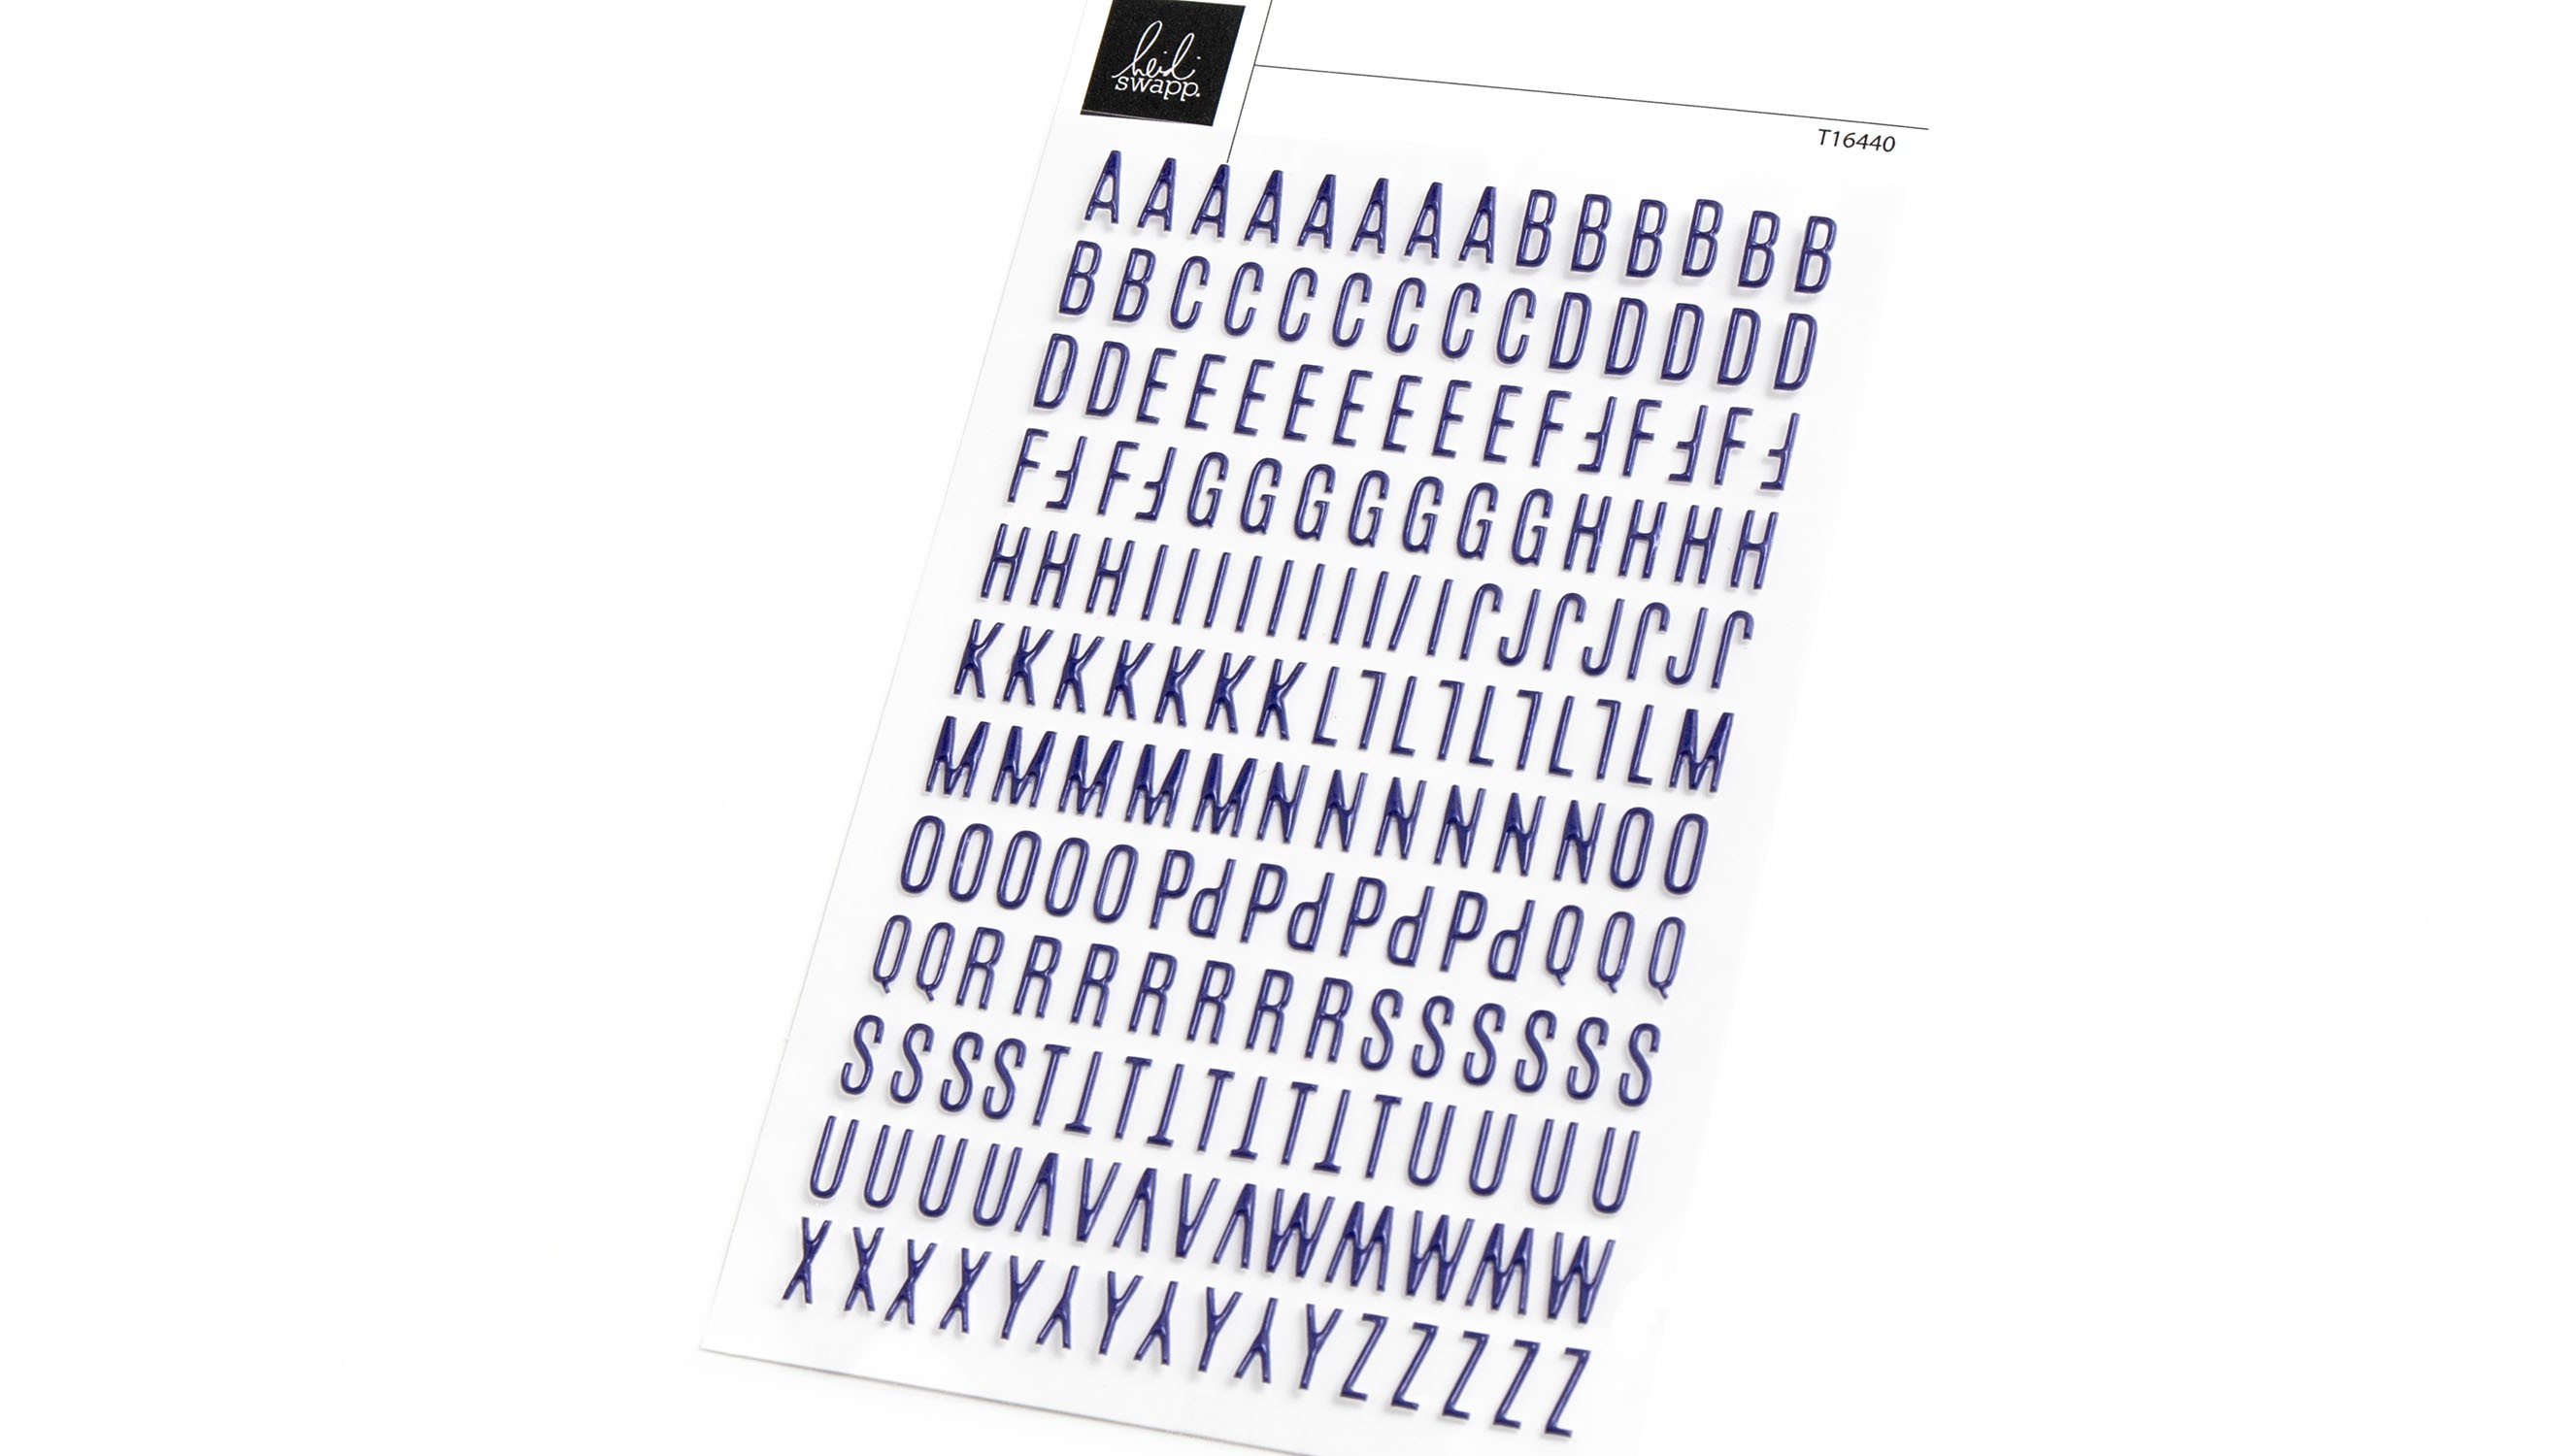 Alphabet Stickers – The Dotted i